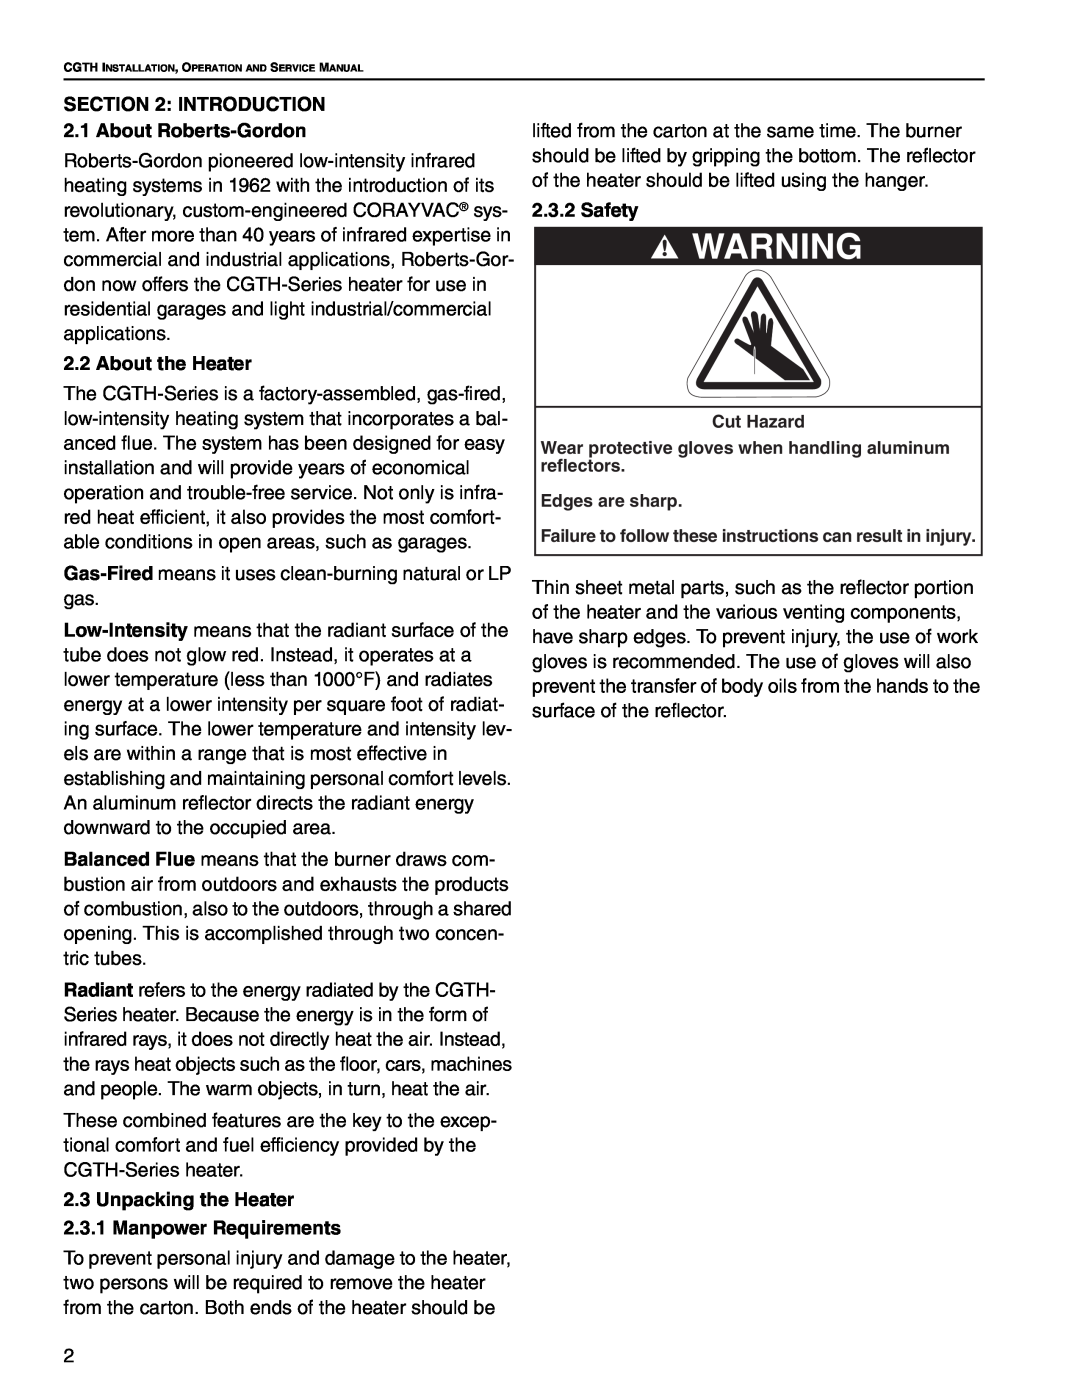 Roberts Gorden CGTH-40, CGTH-30, CGTH-50 service manual About the Heater, Safety 